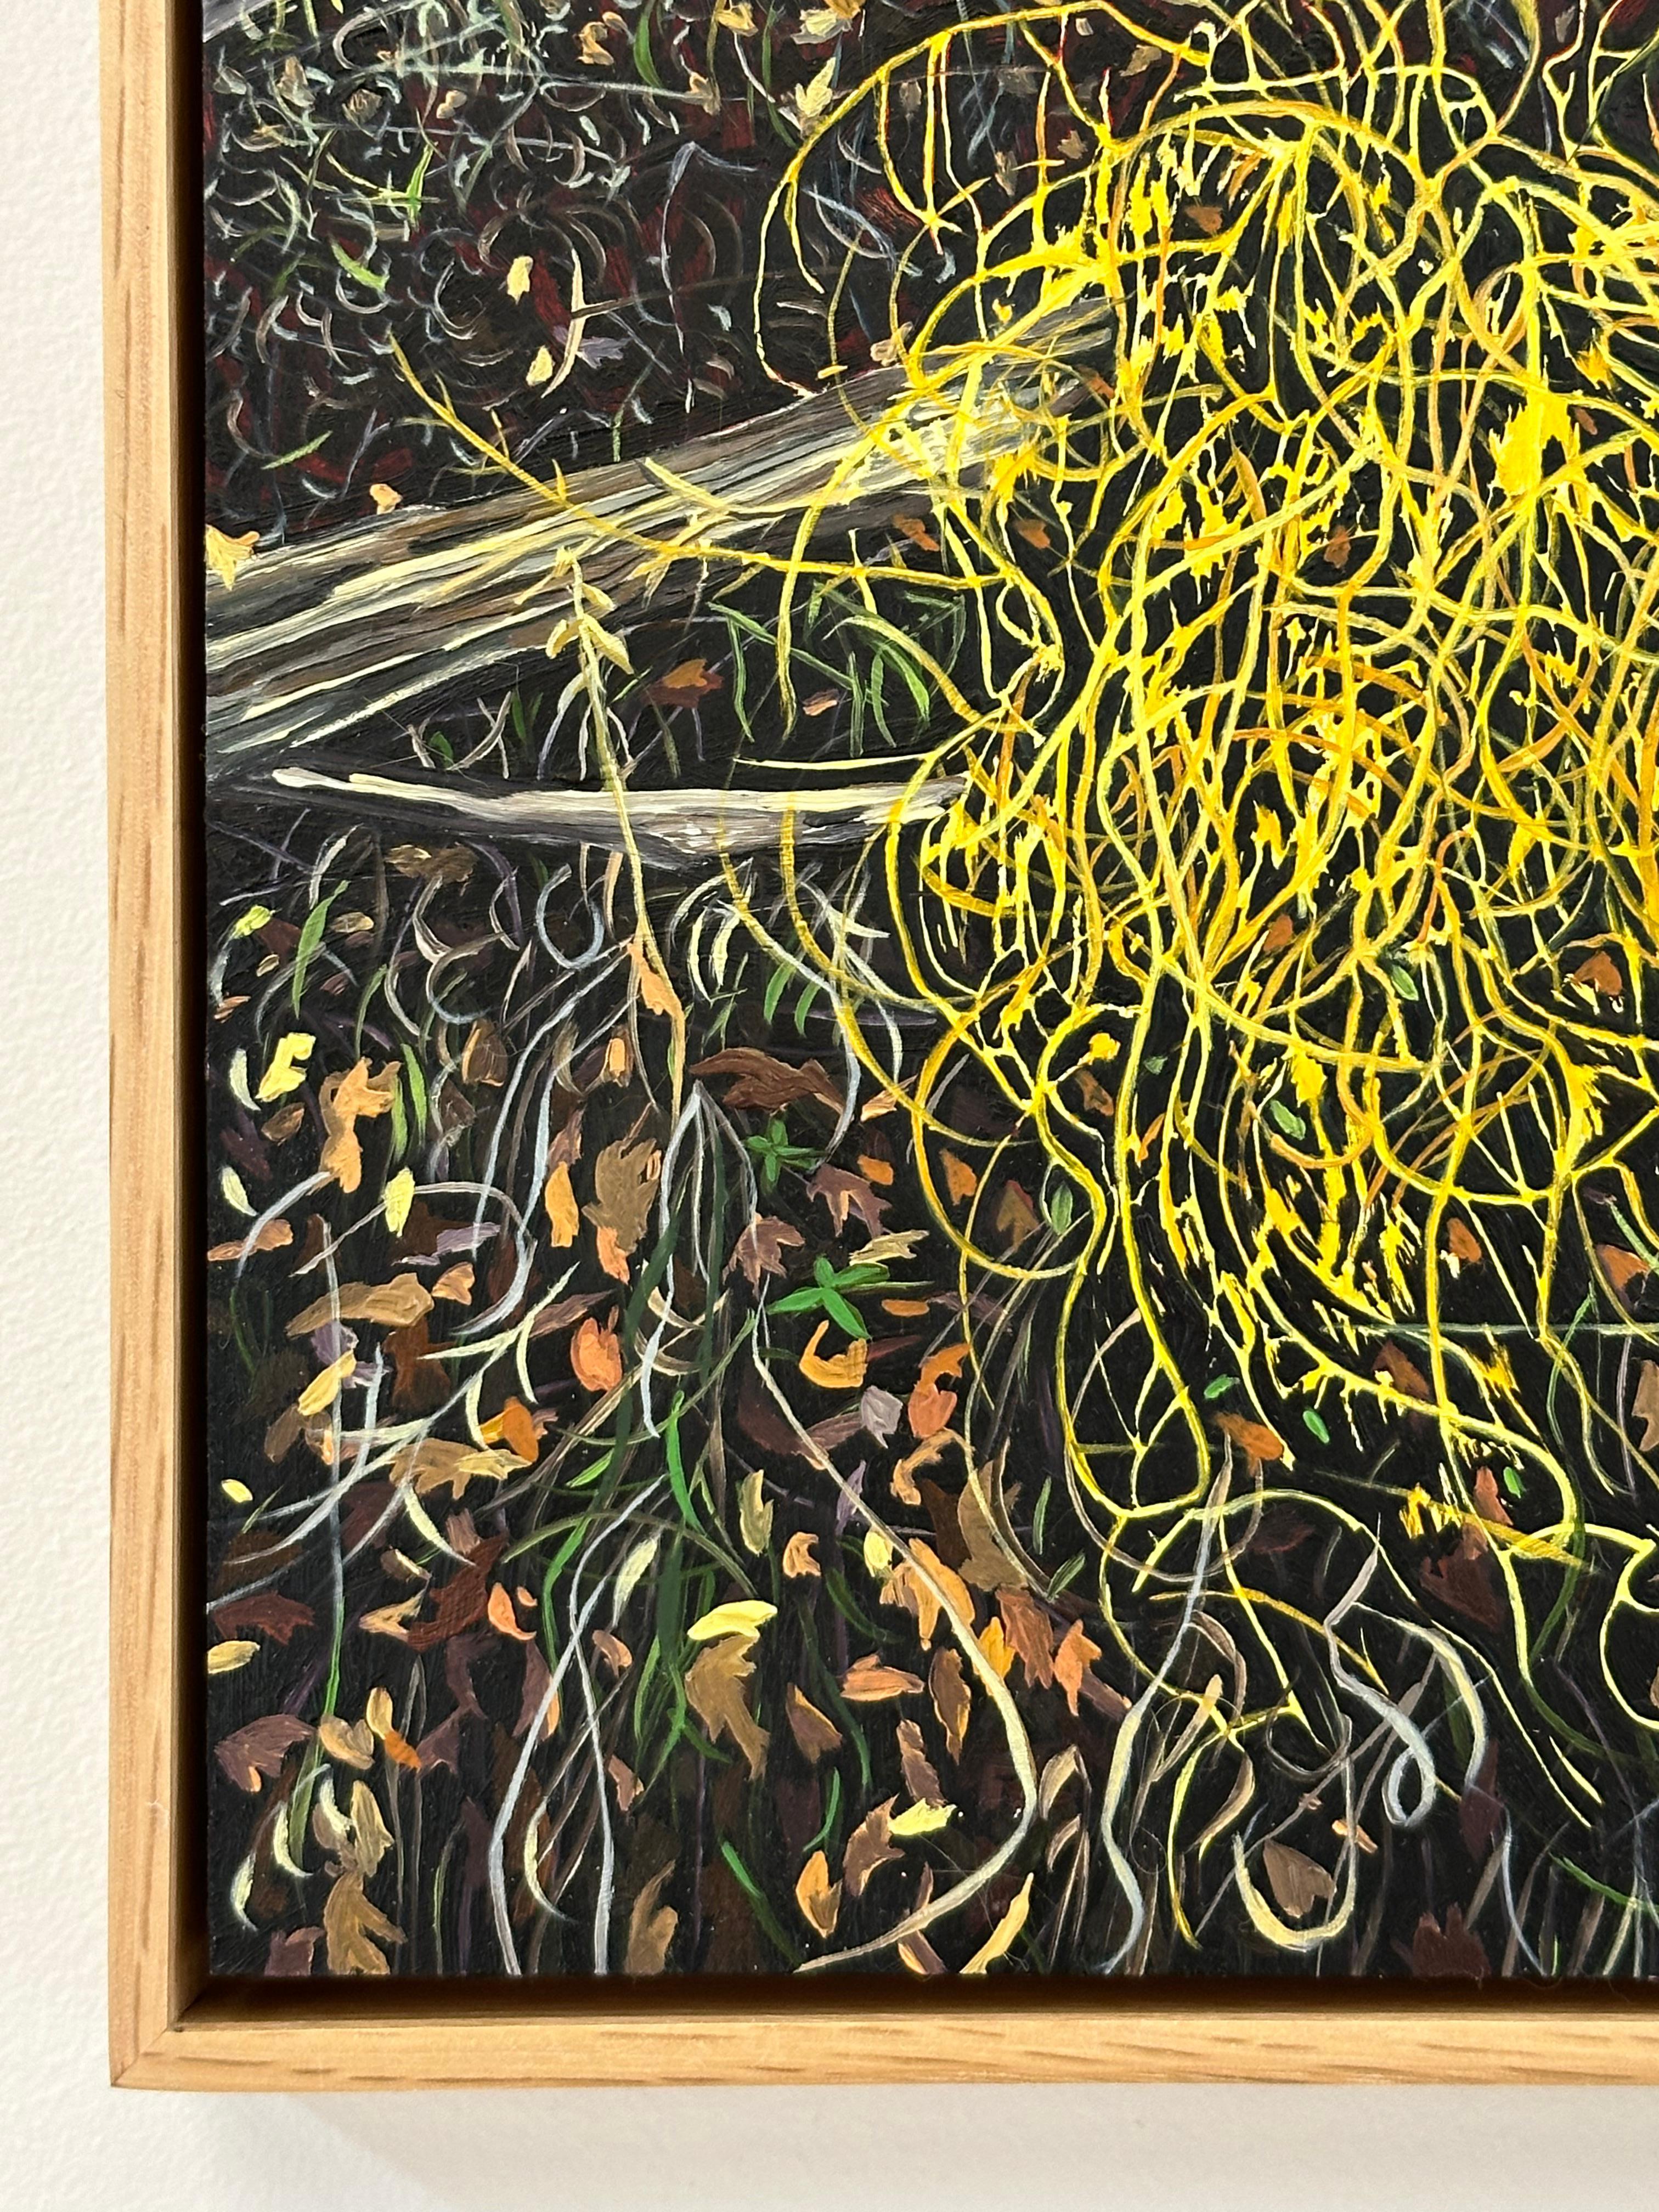 A bright yellow wild asparagus bush can be seen surrounded by leaves on the ground, barren tree branches framing a pale blue sky. Signed and dated on recto, signed, dated and titled on verso.

Amanda Acker’s nuanced oil paintings on panel give a